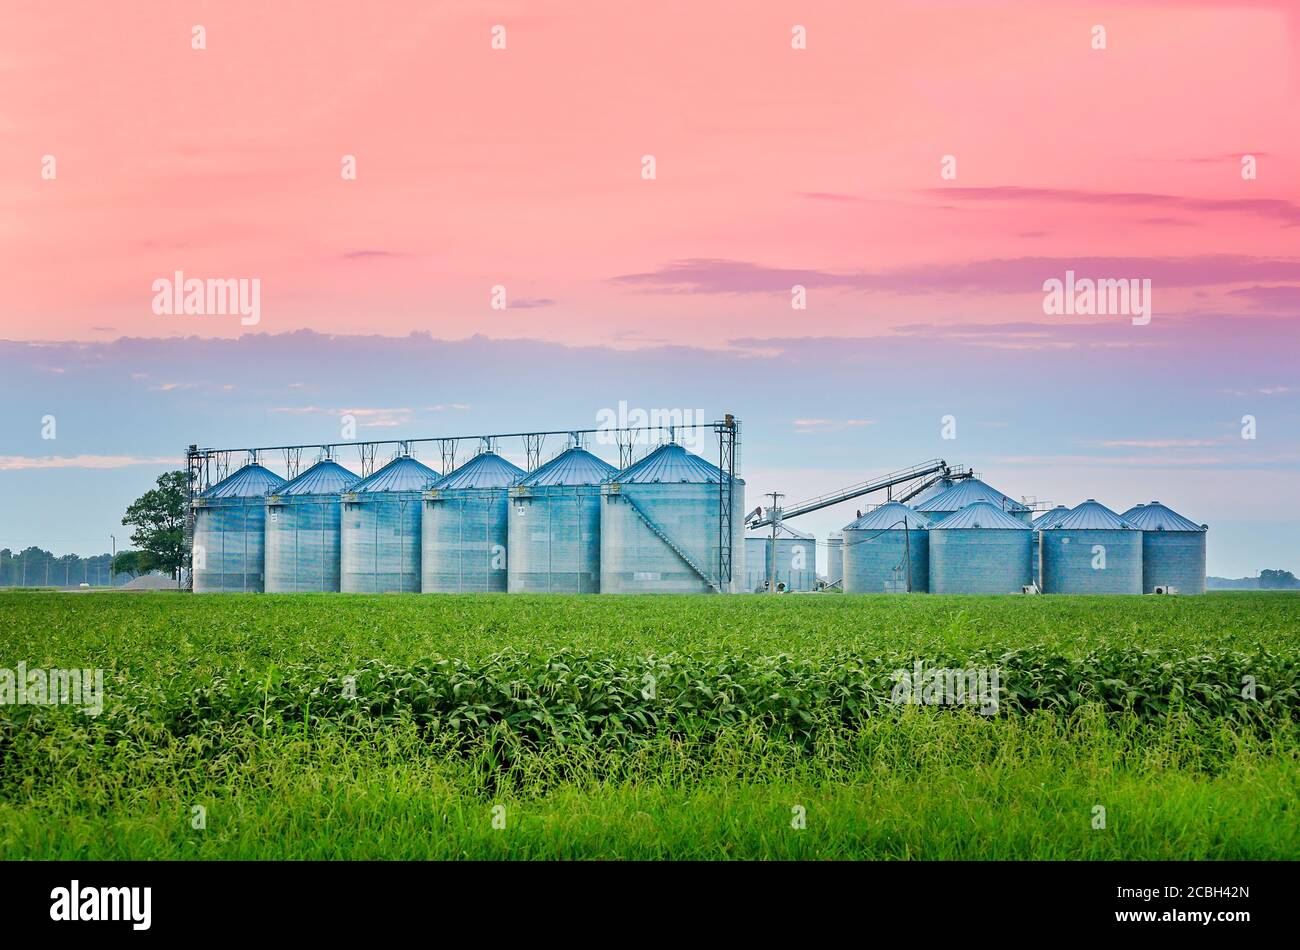 The sun rises over steel grain silos in the Mississippi Delta, Aug. 8, 2016, in Cleveland, Mississippi. Stock Photo